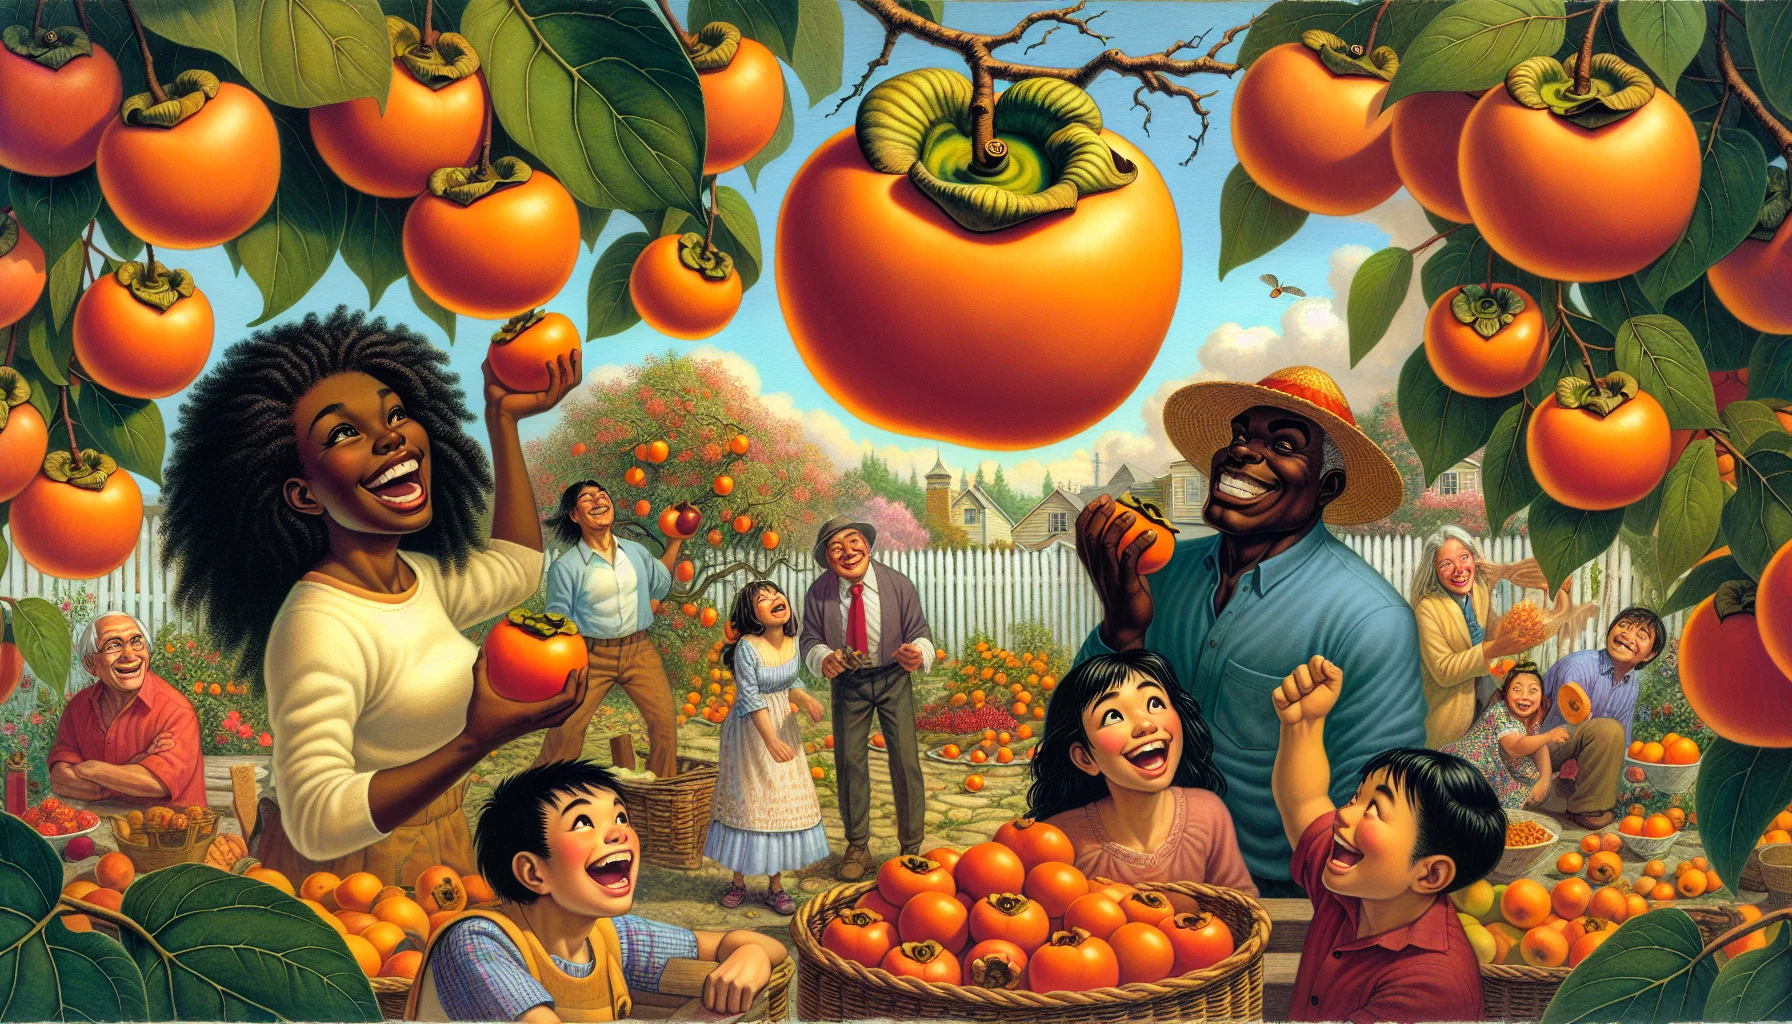 Visualize a whimsical scene set in an abundant garden at the height of harvest season. Large, luscious persimmons are ripening on laden branches while a group of diverse individuals marvel at their beauty. Picture a black woman laughing heartily as she plucks a ripe persimmon, a Hispanic man playfully juggling ripe fruits and a Caucasian boy whose eyes widen in awe at the sight. Let the scene radiate warmth and cheerfulness to capture the essence of a joyful gardening experience and the delight it brings to people of all descents and genders.